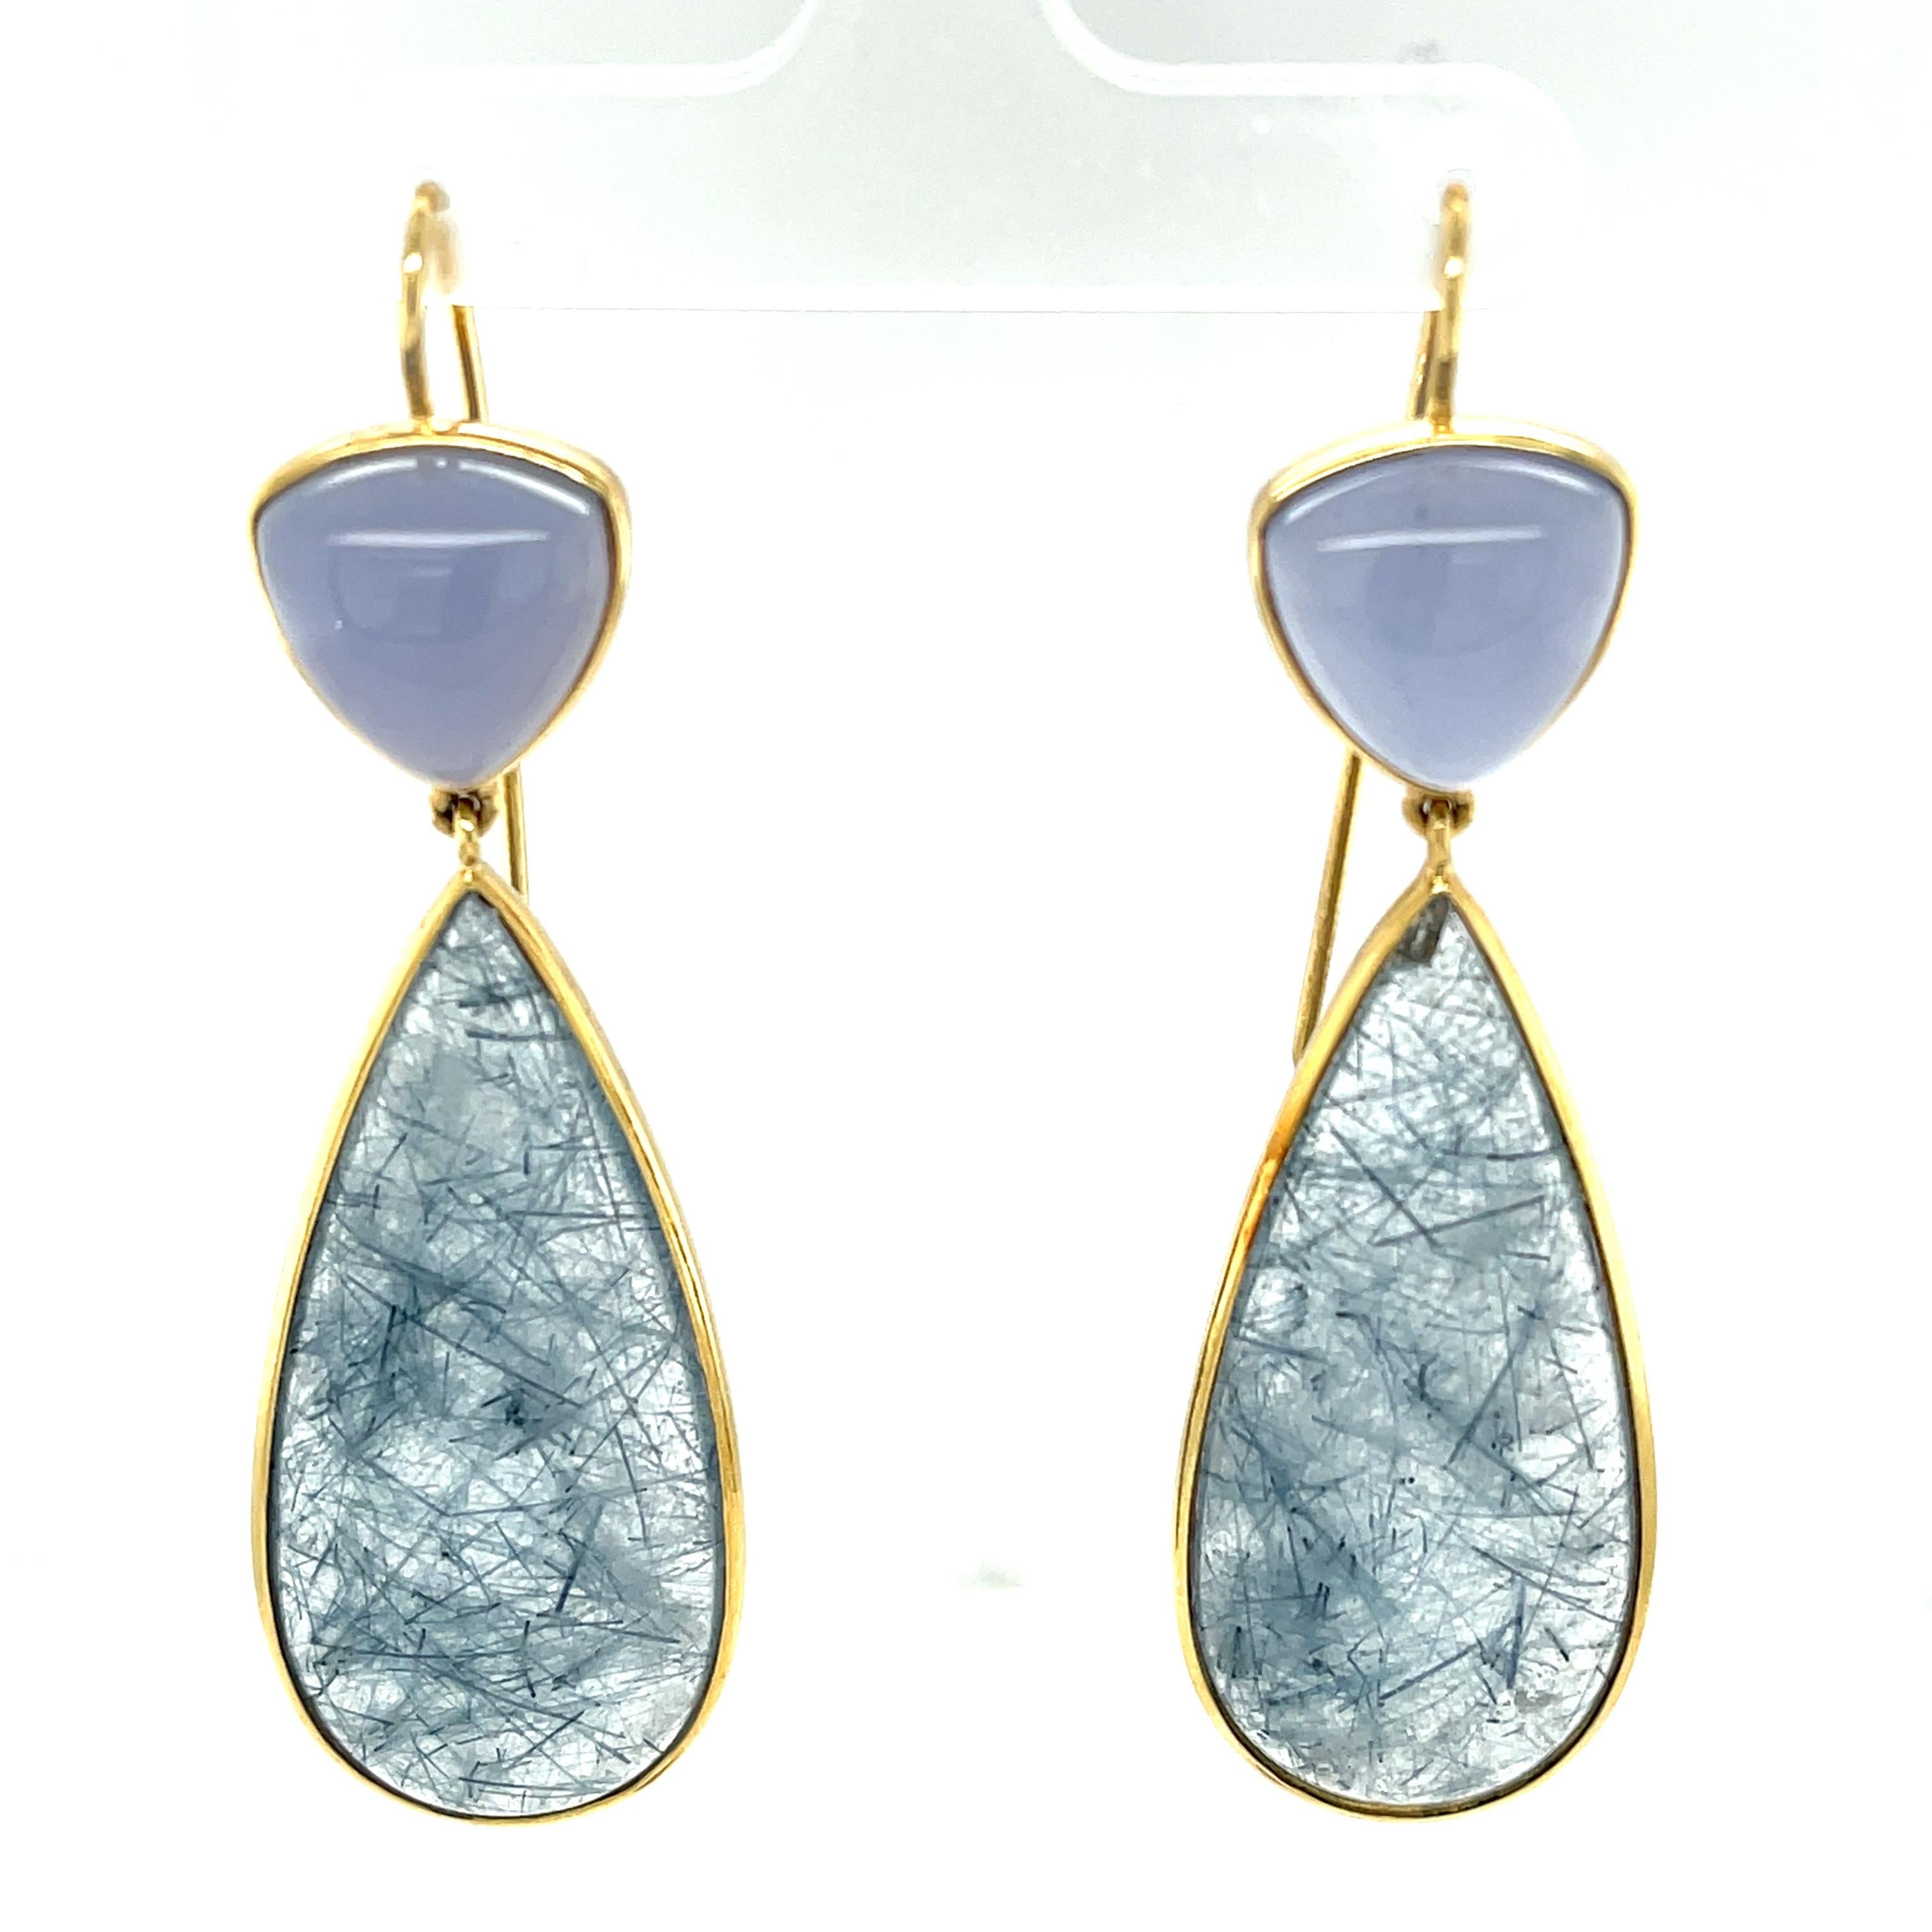 These bezel set actinolite and chalcedony cabochon drop earrings are a unique blend of color, texture and form! Translucent lavender chalcedony triangles sit atop transparent quartz pendalogues with beautiful blue actinolite needle inclusions in